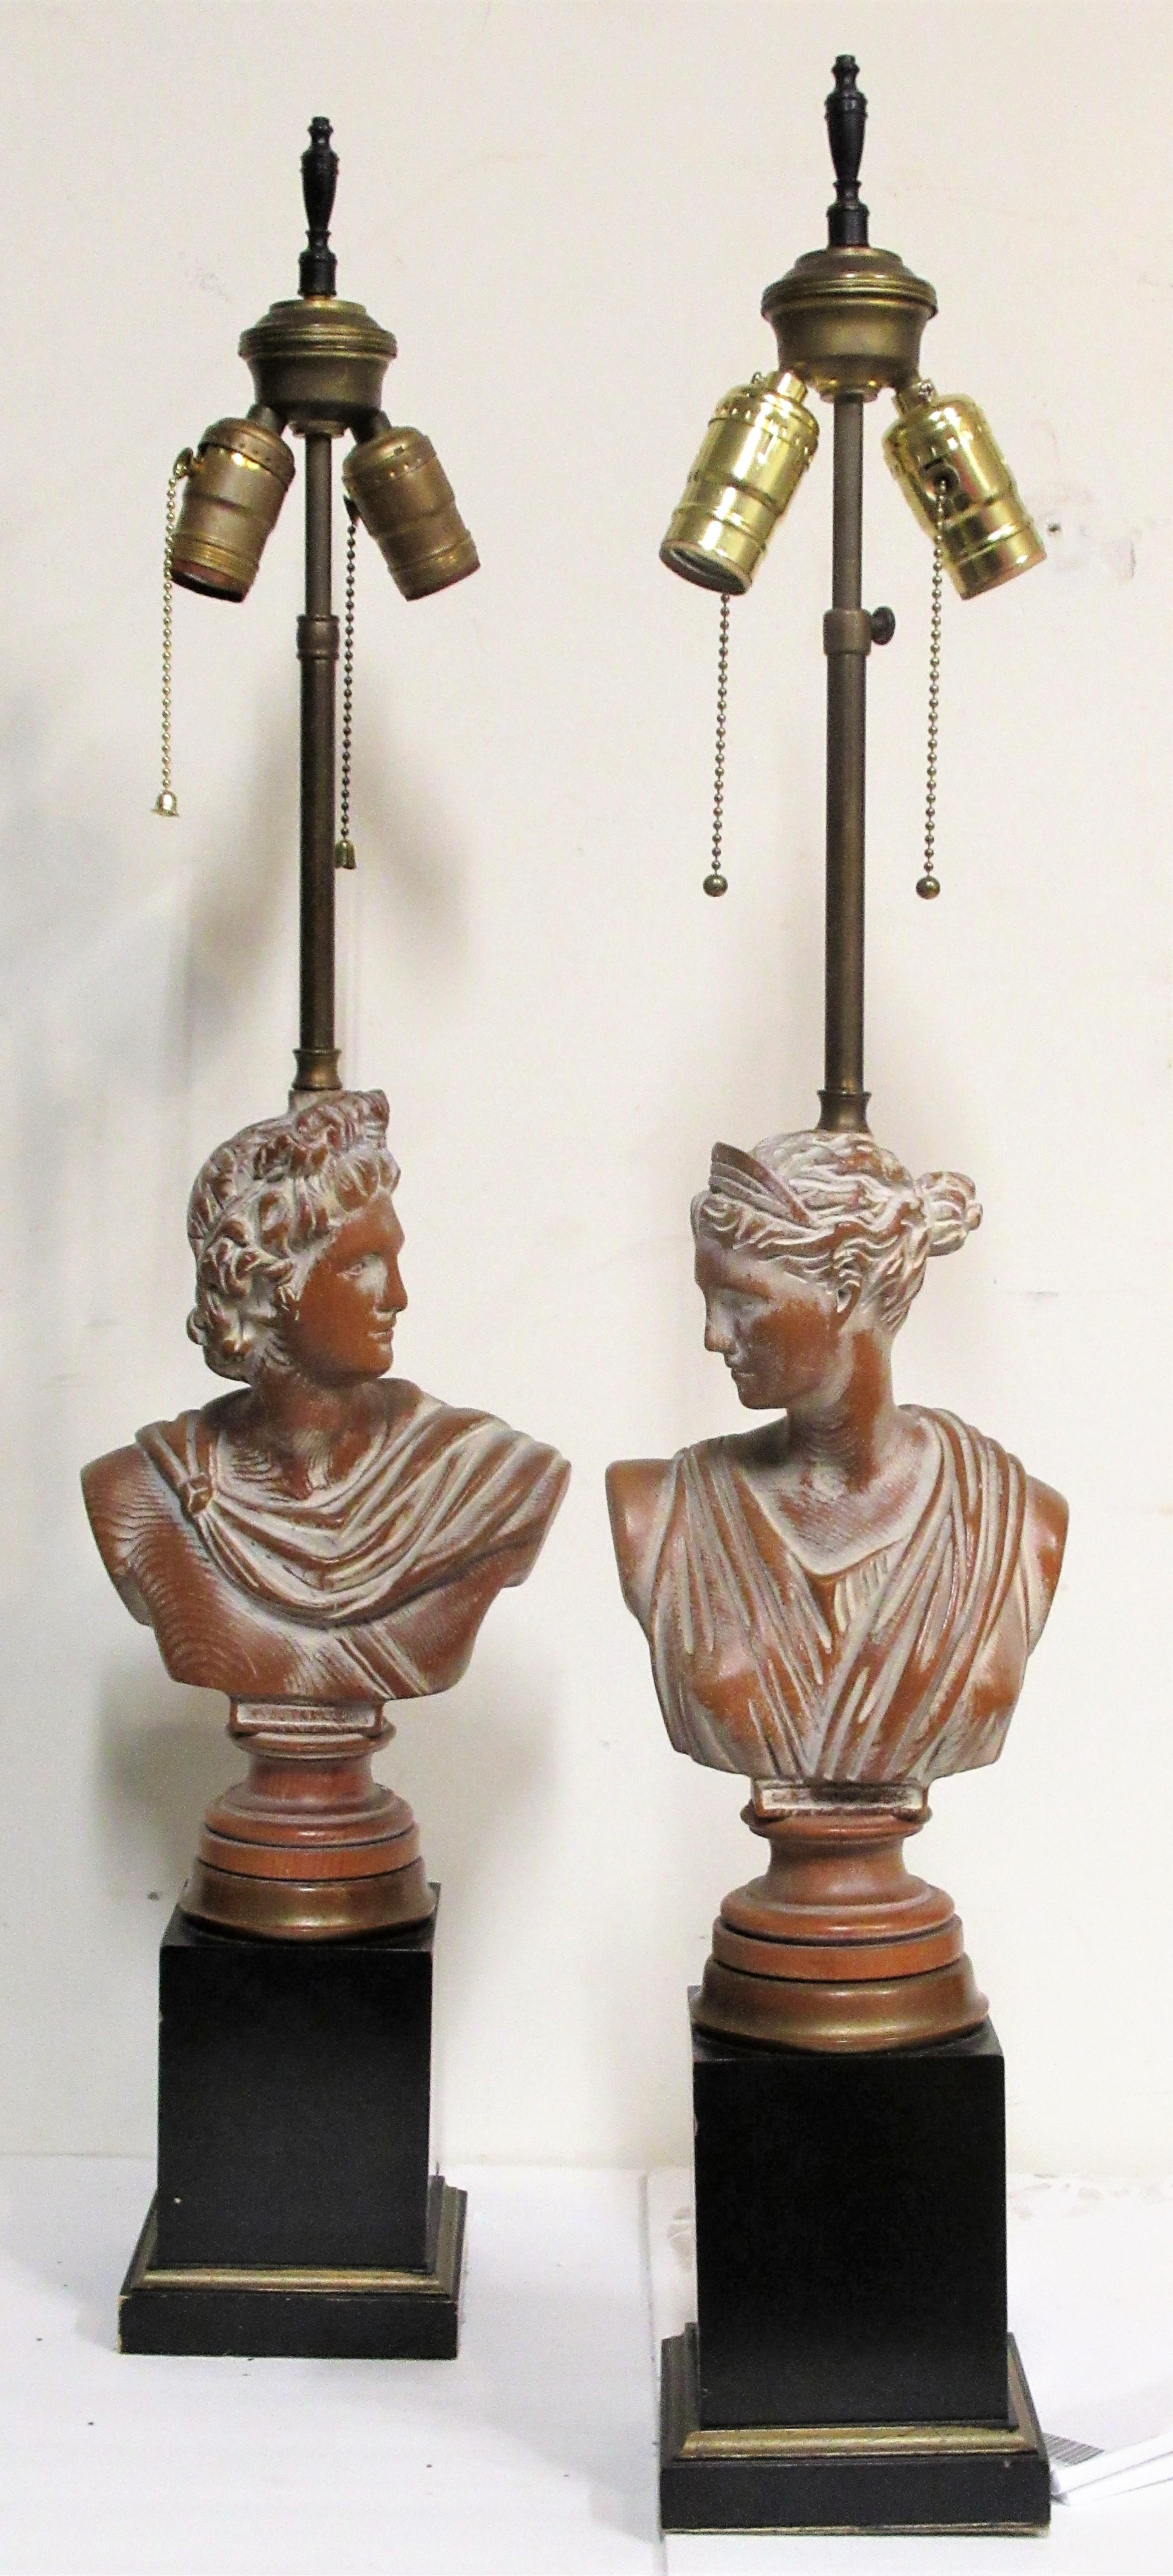 Pair of neoclassical antiquity style ebonized wood and brass trim pedestal base table lamps with original limed whitewashed and partially gilded surface to the carved wood busts of Daphne and Apollo, Circa 1940's-1950's. Look at all pictures and